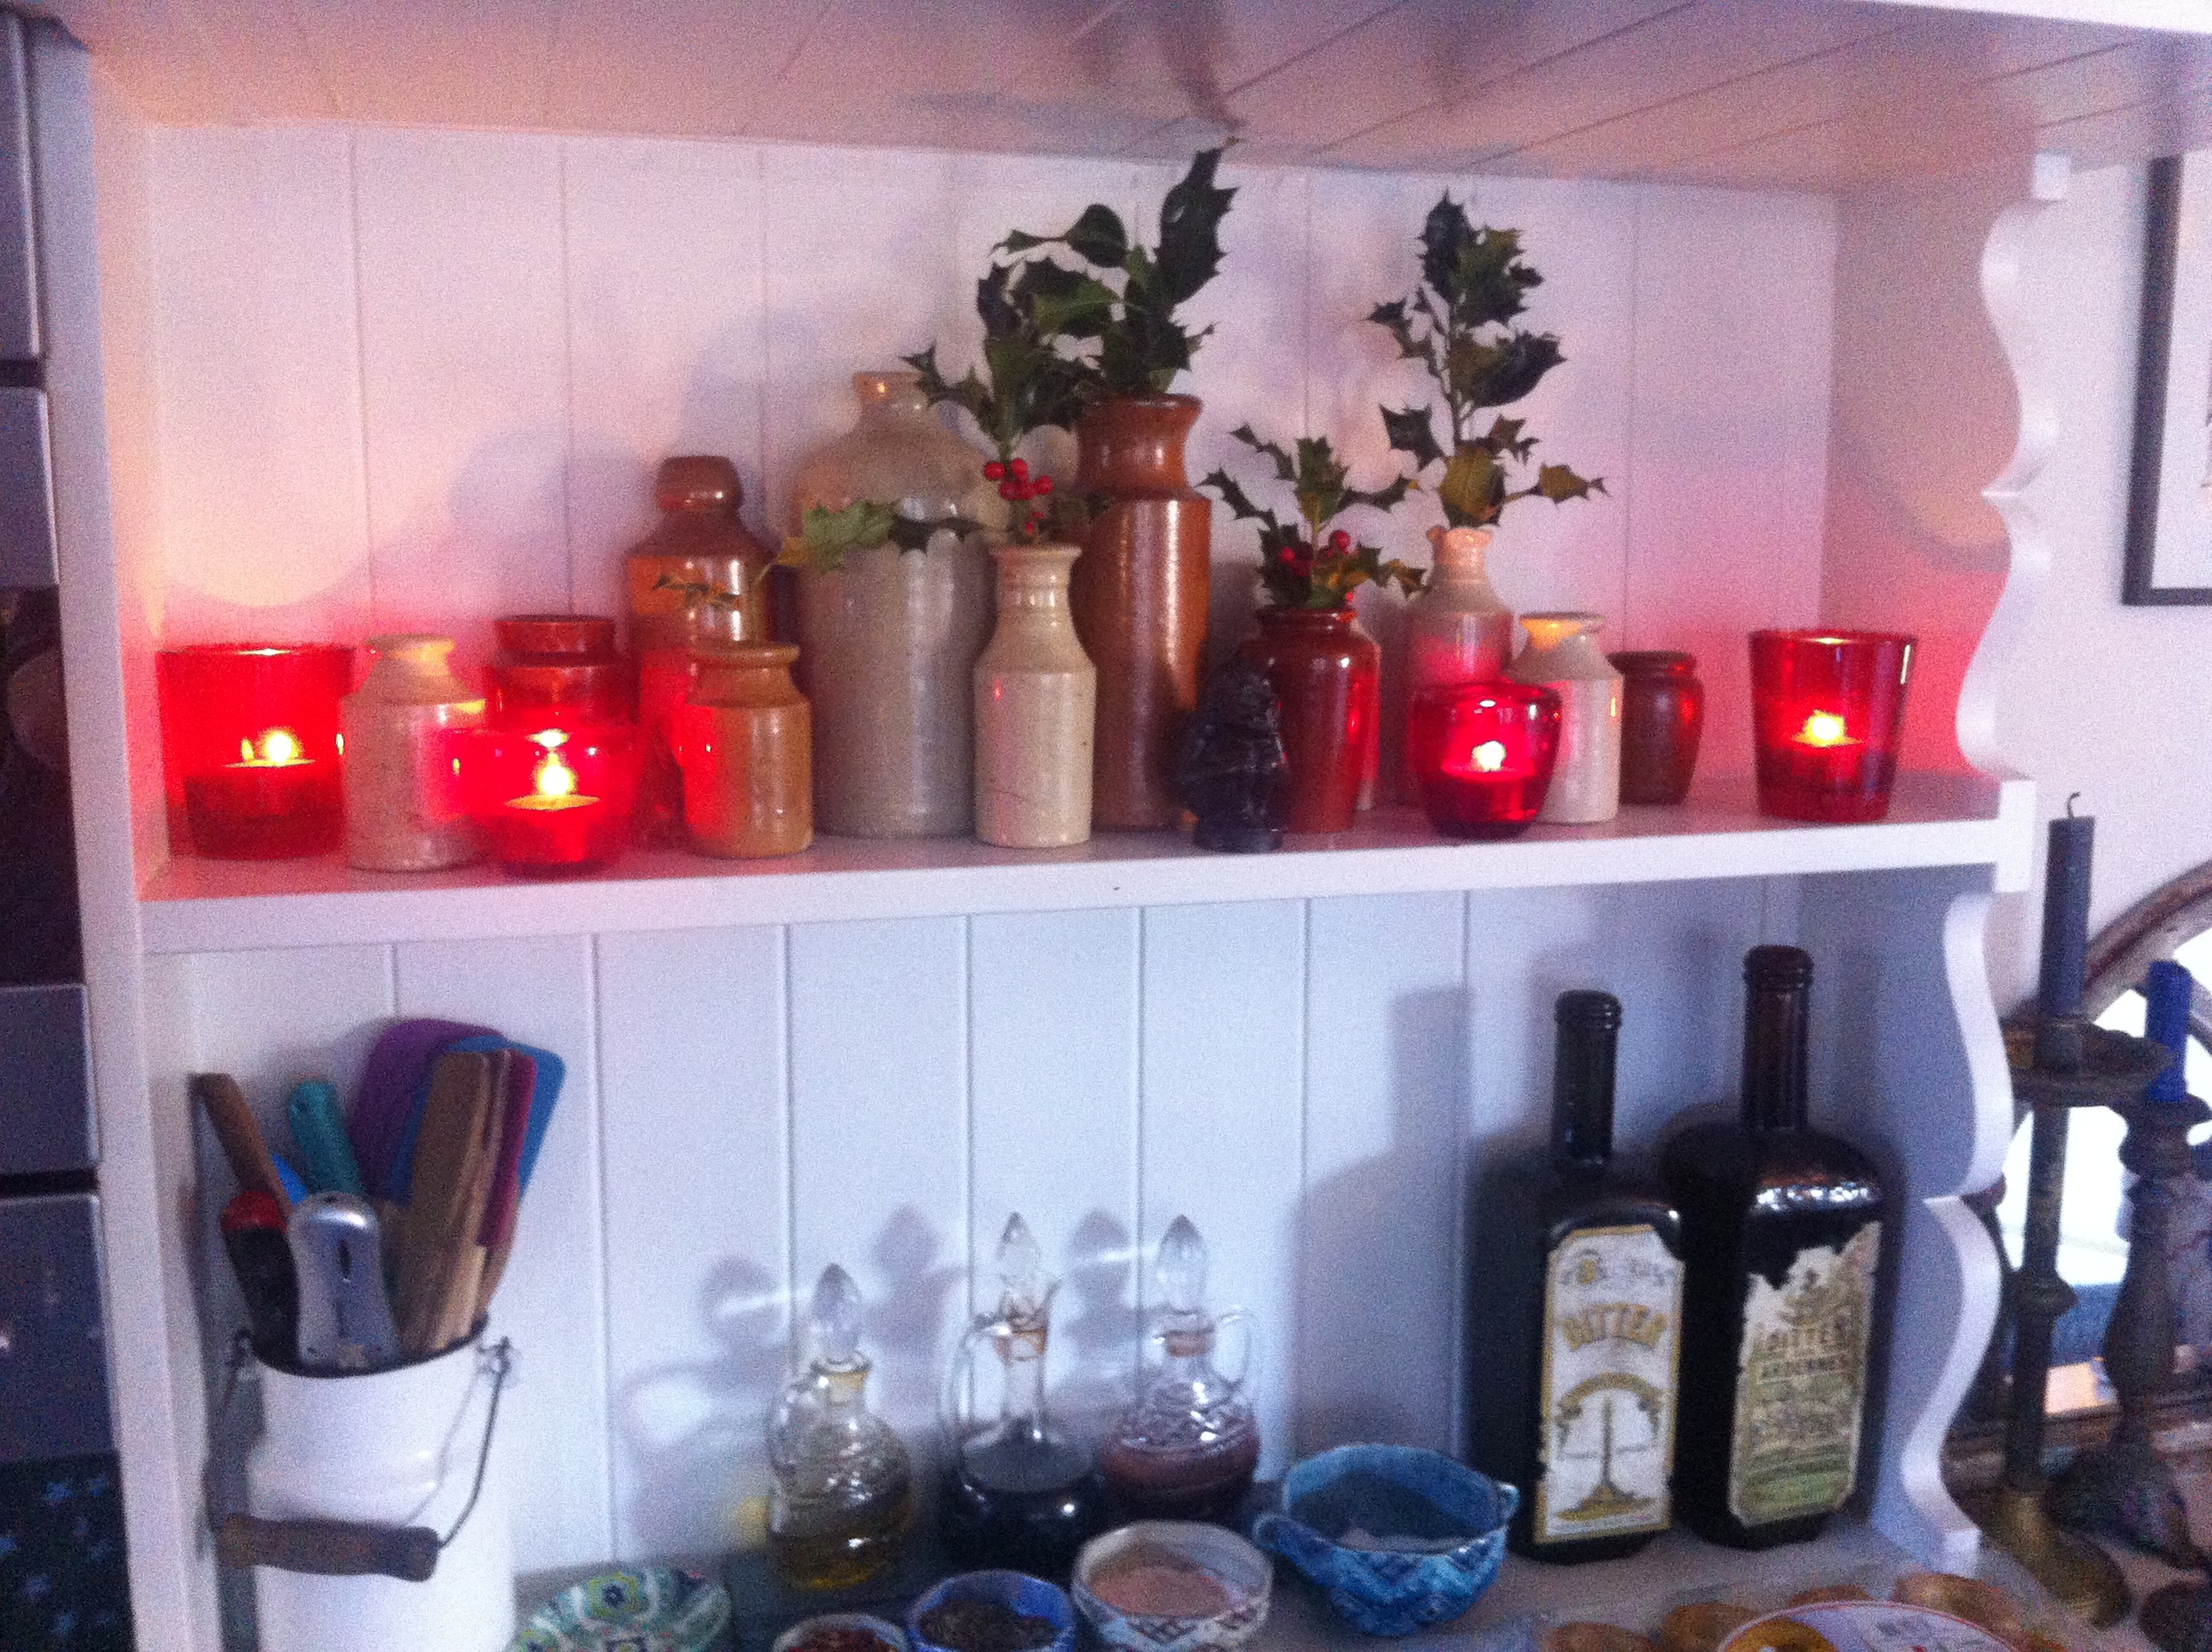  Tiny sprigs of holly in vintage bottles lit by a few candles 